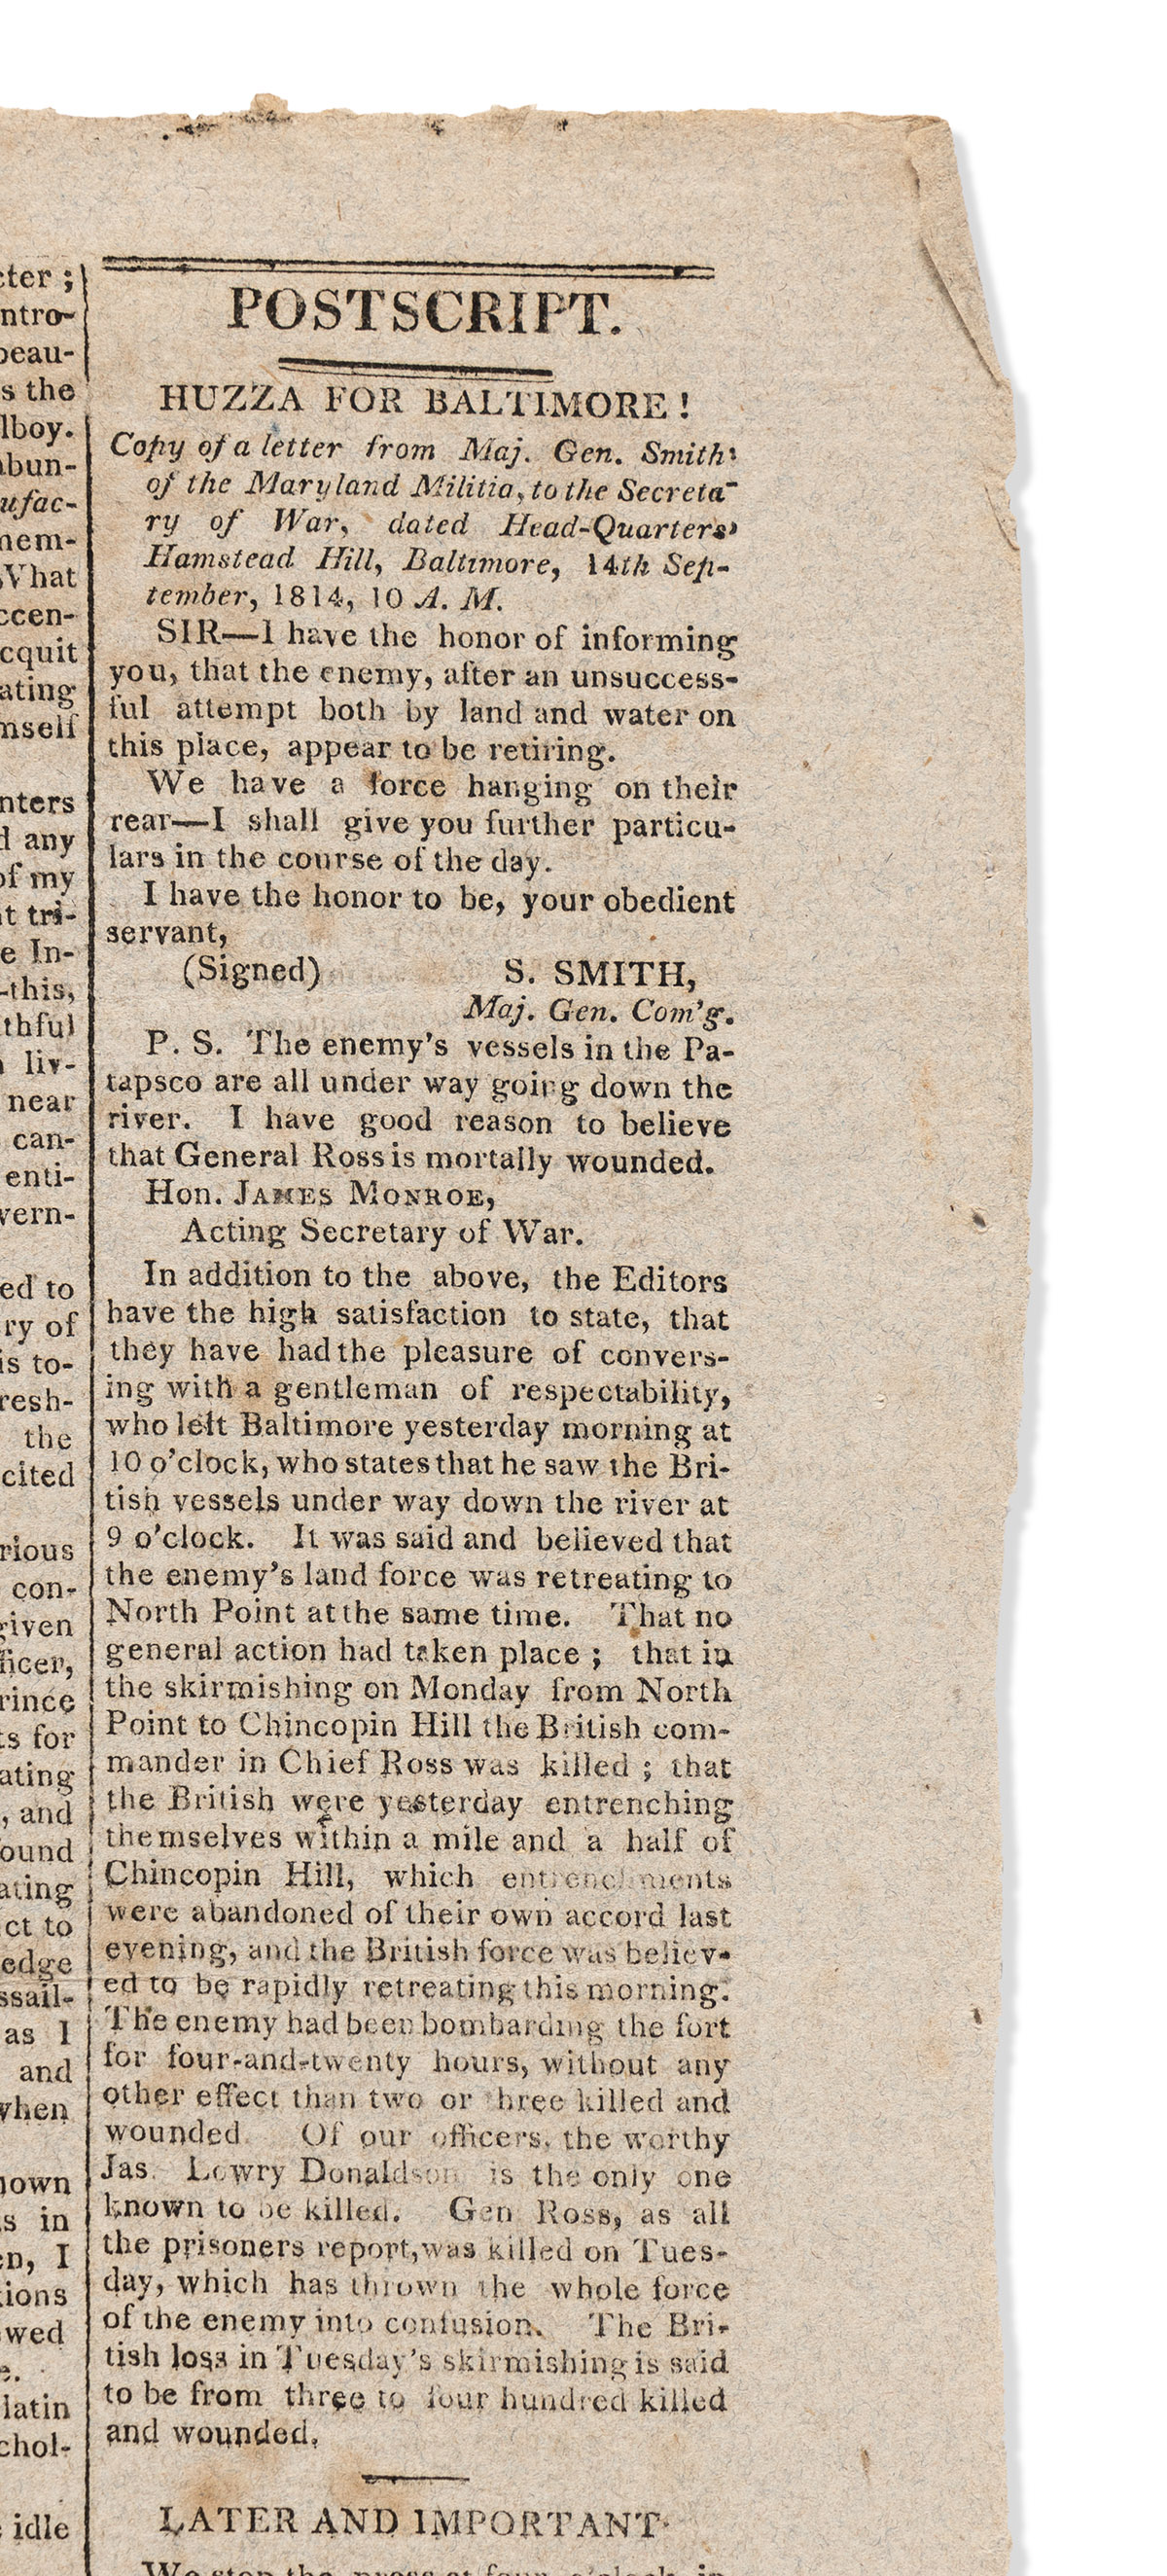 (WAR OF 1812.) Huzza for Baltimore!: 3 issues of the National Intelligencer on the nearby Battle of Baltimore.